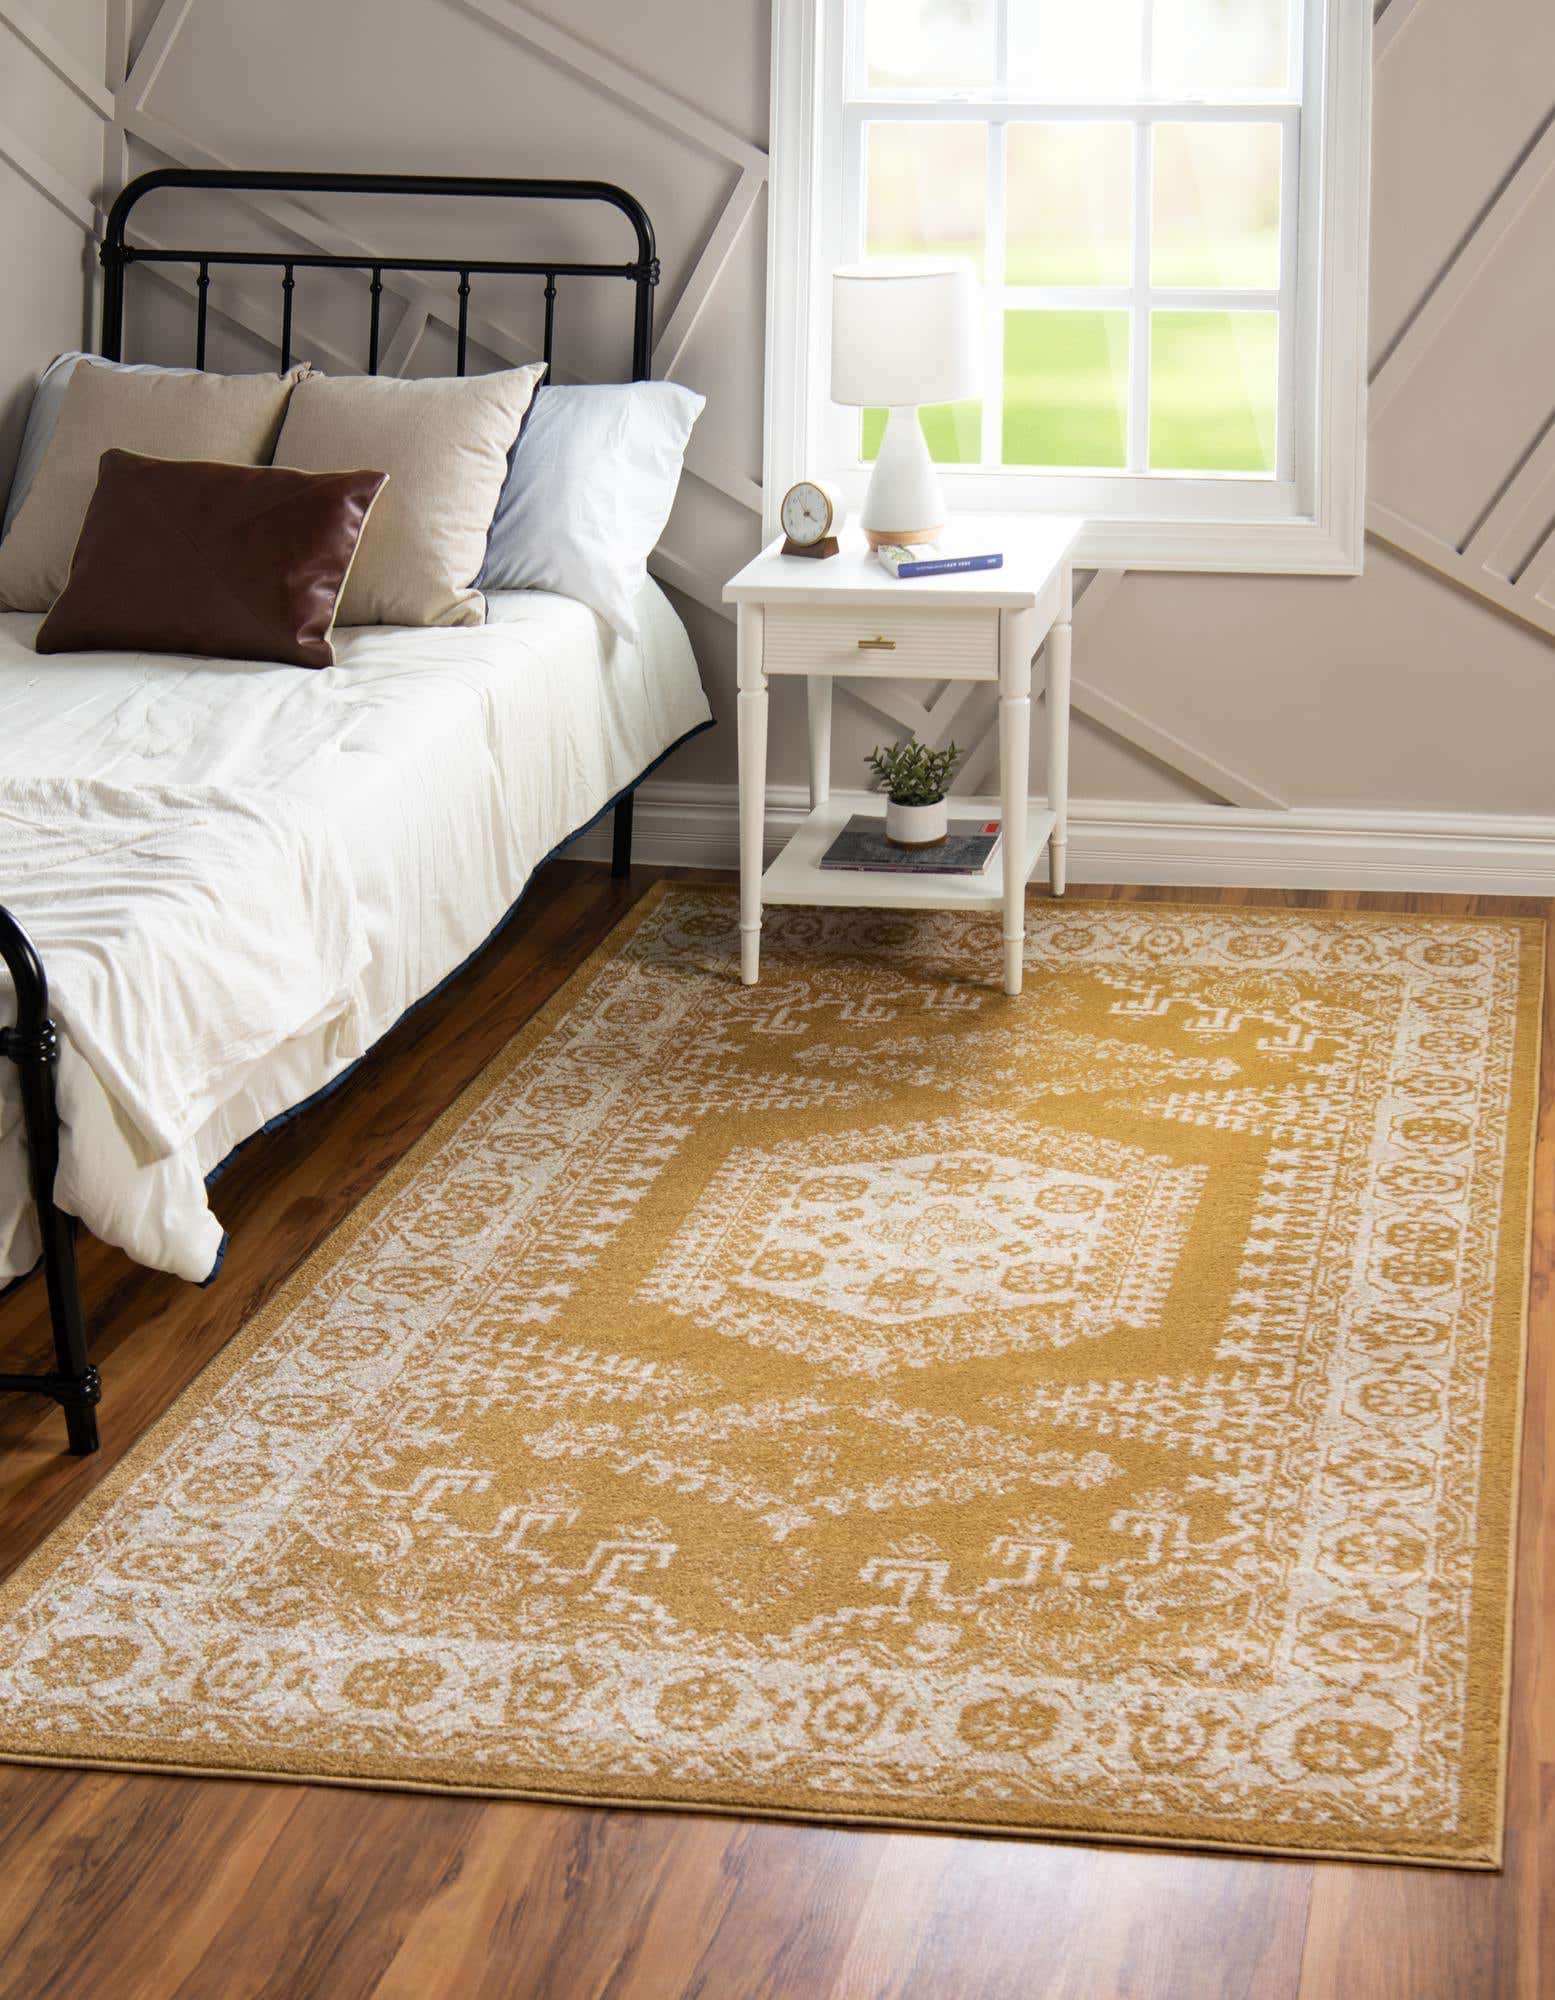 Warm Up Your Bedroom with a Gold Rug